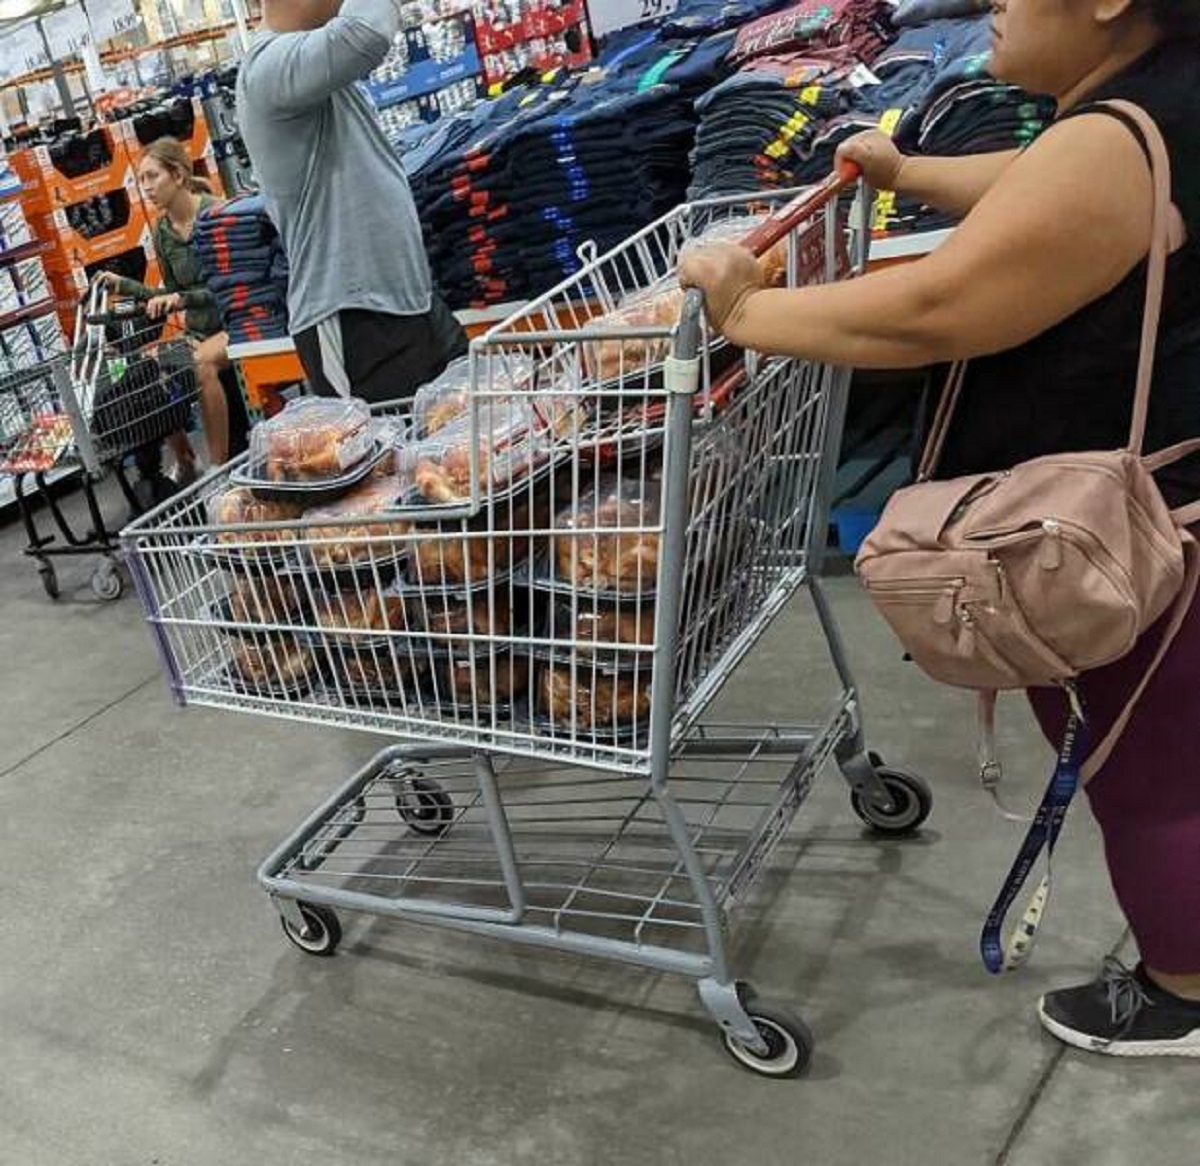 "Went To Costco To Grab A Rotisserie Chicken For The Weekend, But This Lady Beat Everyone To It"